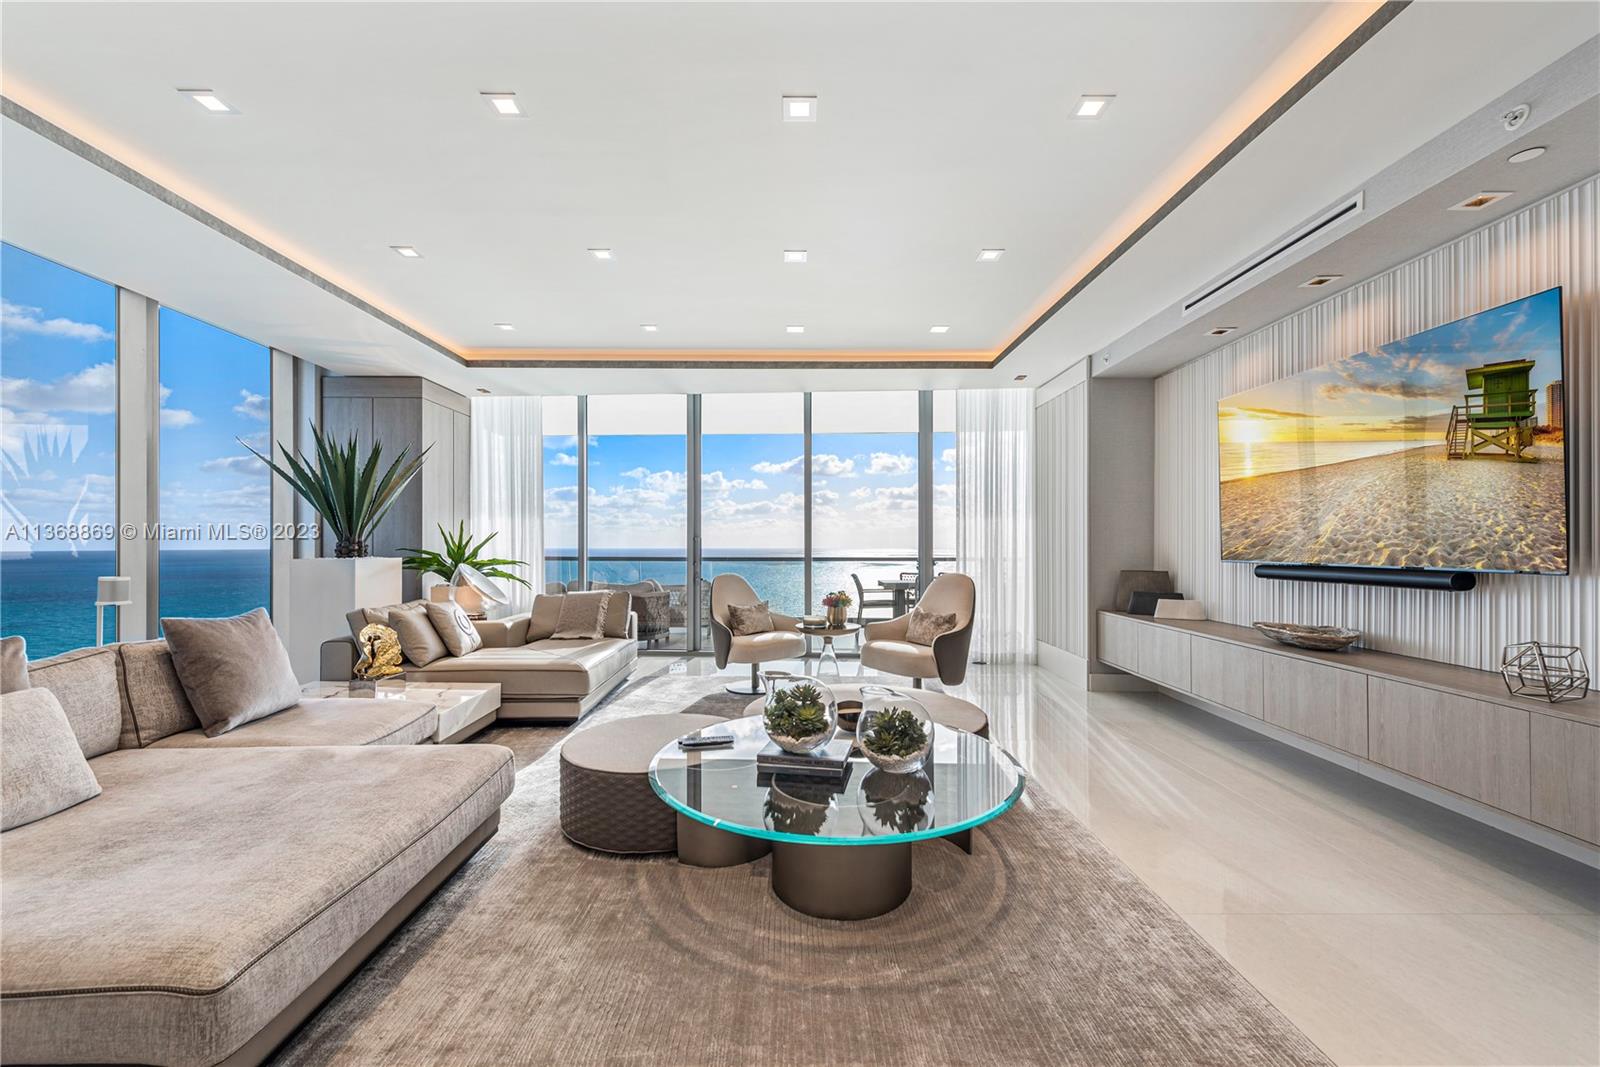 Step inside this ultra-chic and fully furnished residence in the sky in the heart of Sunny Isles. This magnificent 4 bedrooms, 5.5 bathrooms unit was designed by the renowned Steven G. Enjoy breathtaking direct ocean views as well as intracoastal and skyline views from your private terraces. Unit features include 10’ ceilings, imported Snaidero® Italian cabinetry, stone countertops, top-of-the line Gaggenau® appliances, 11' deep oceanfront sunrise terrace + summer kitchen, and custom closets.

This property offers unparalleled amenities that includes private beach club, state of the art fitness center, spa, restaurant, and two pools. Turnberry Ocean Club is synonymous with elegance, sophistication, exclusivity and privacy, making it the ultimate destination for luxury living.